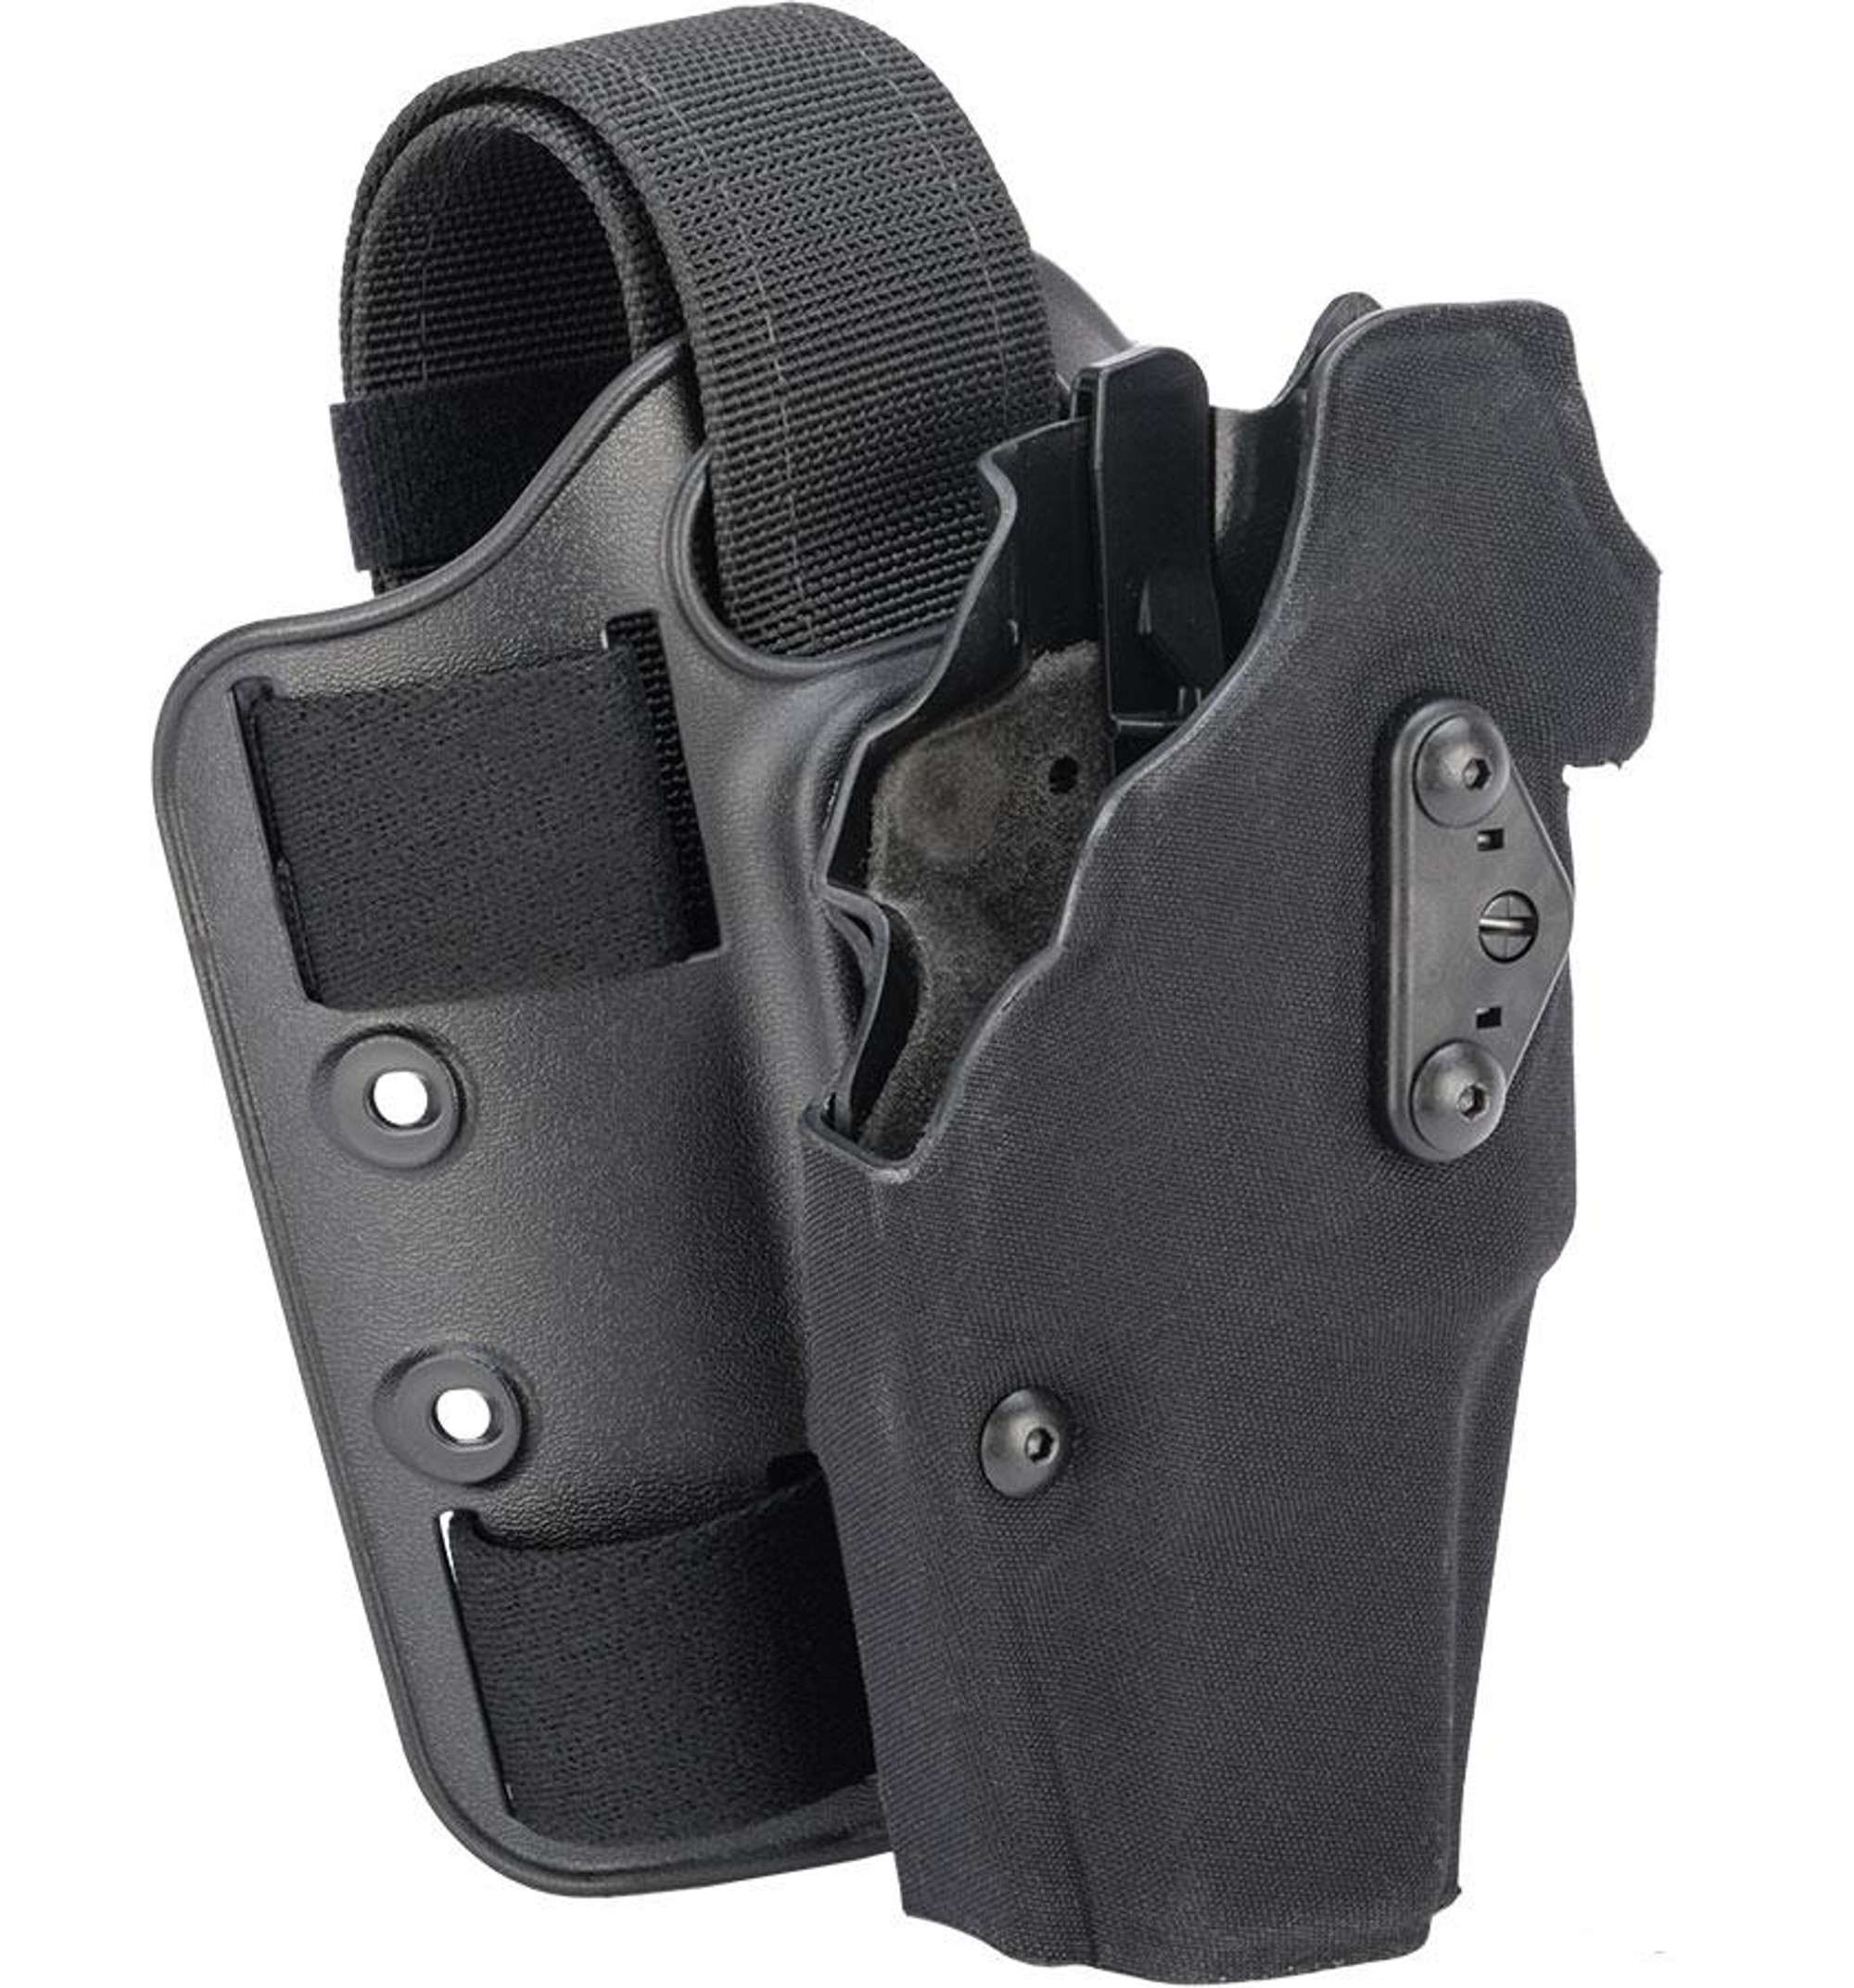 Safariland 6354DO ALS Optic Tactical Holster for Glock 19 / 23 MOS